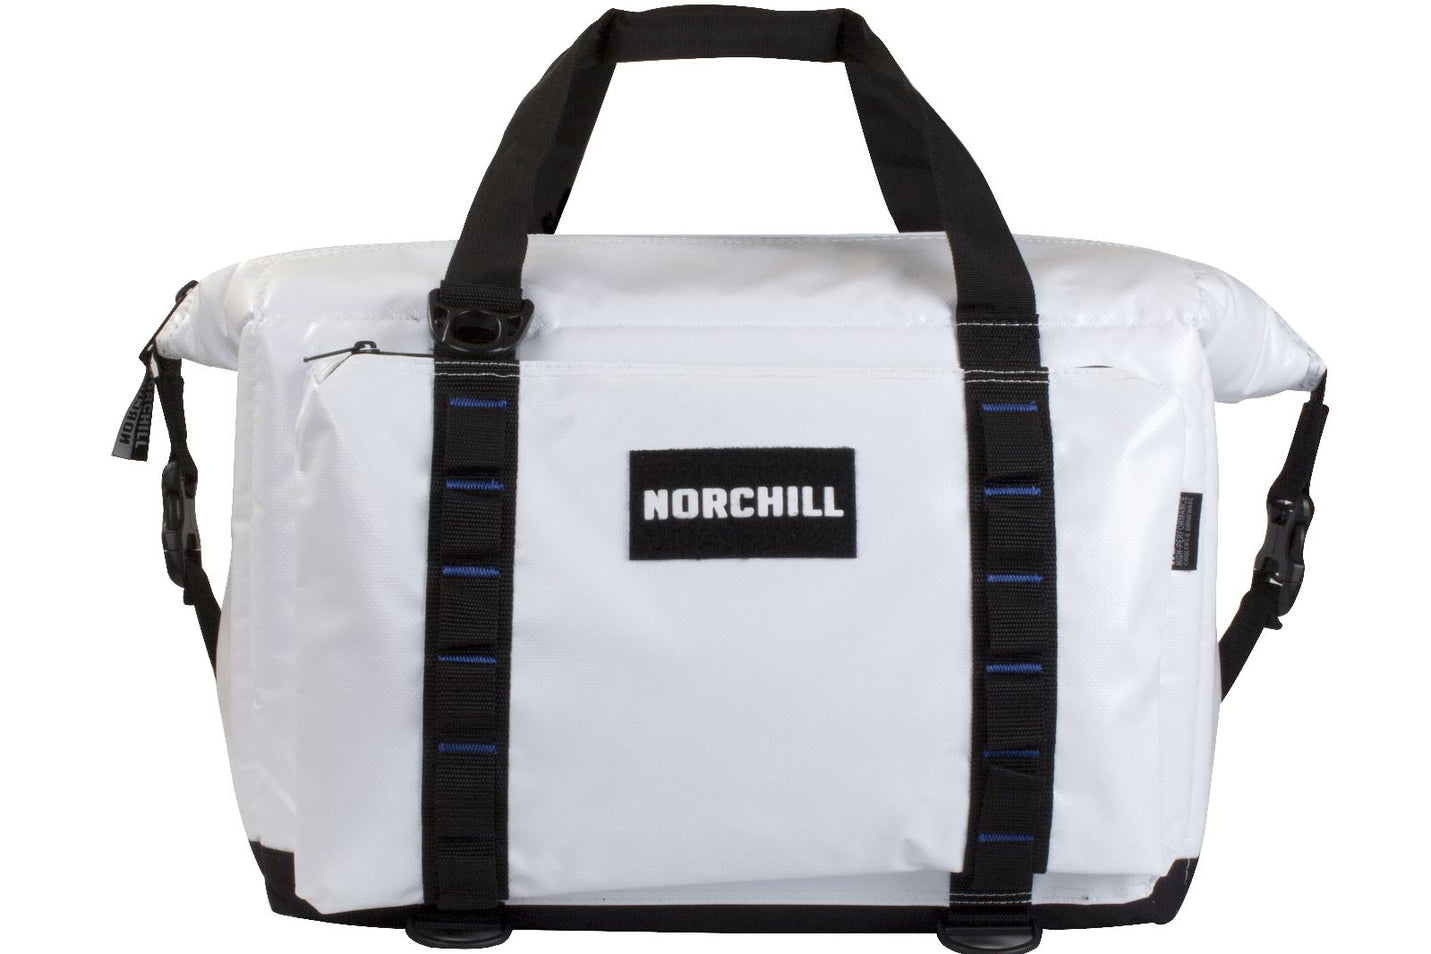 Norchill BoatBag Xtreme Large 48-Can Cooler Bag - White Tarpaulin